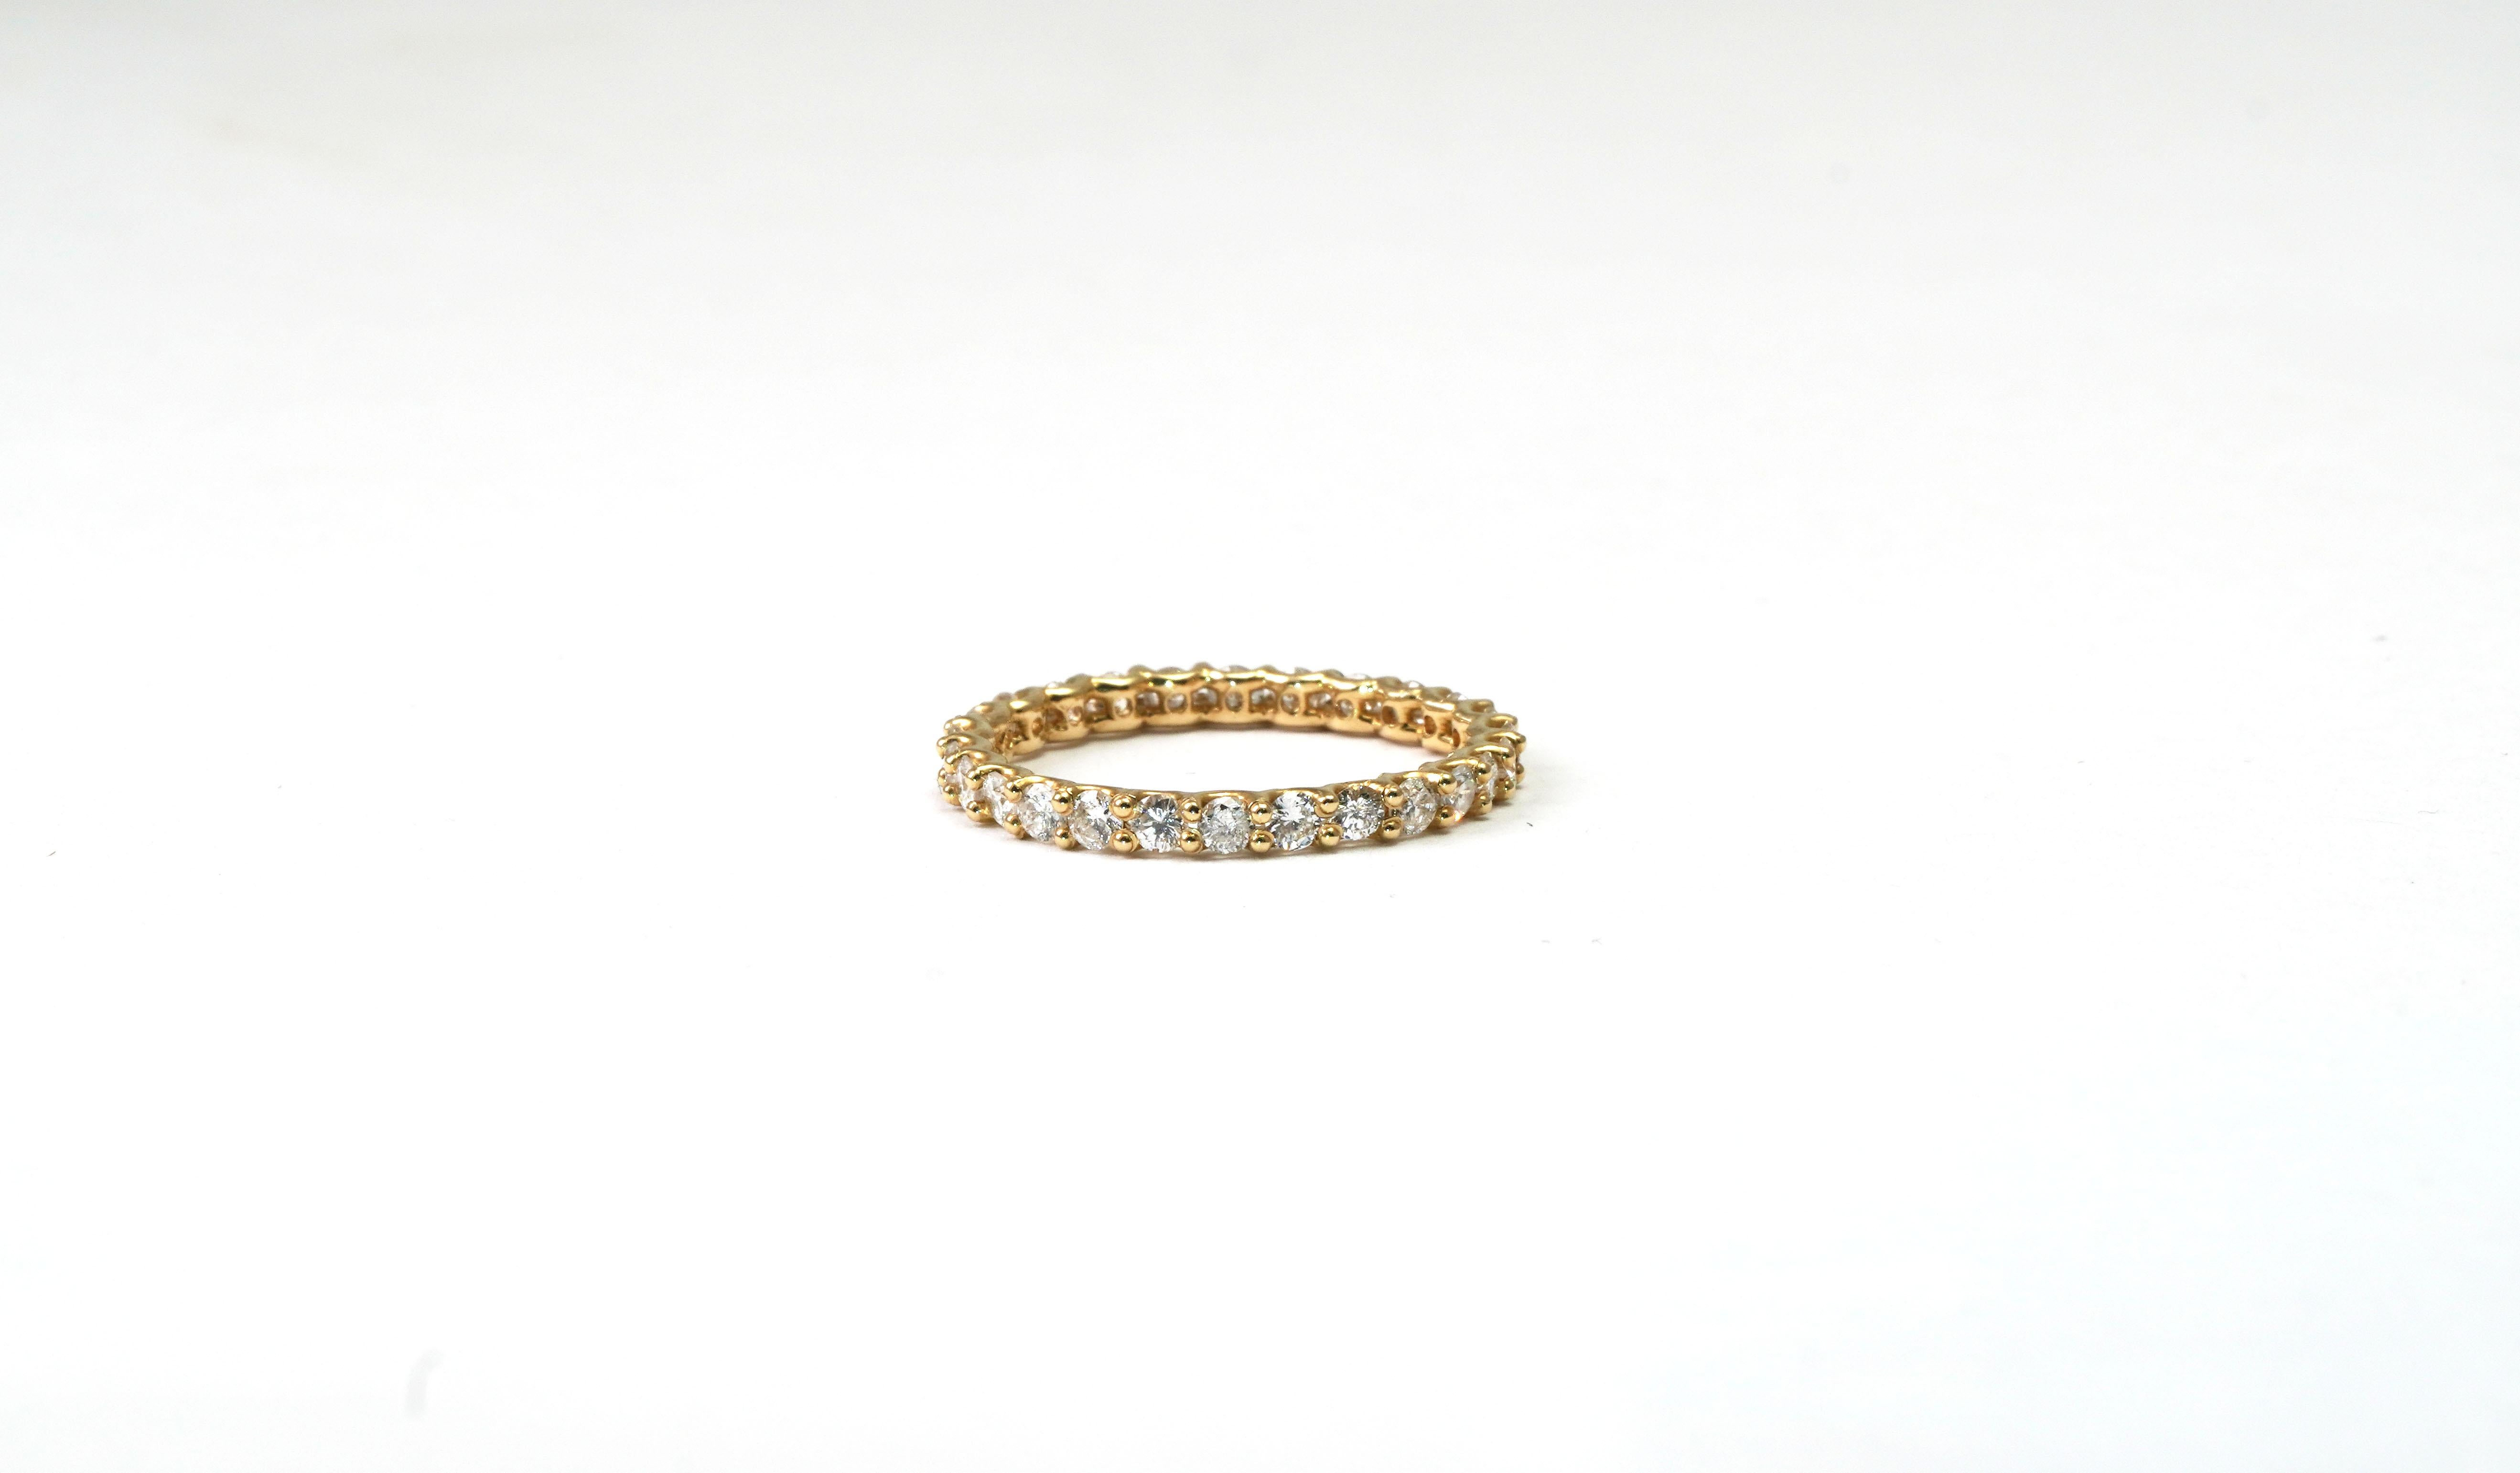 14 kt Gold ring with Diamonds
Gold color: Yellow 
Ring size: 5 US
Total weight: 1.06 grams

Set with:
- 27 diamonds in total: 0.70 ct
Cut: Brilliant
Colour / Clarity: G-H / SI2
